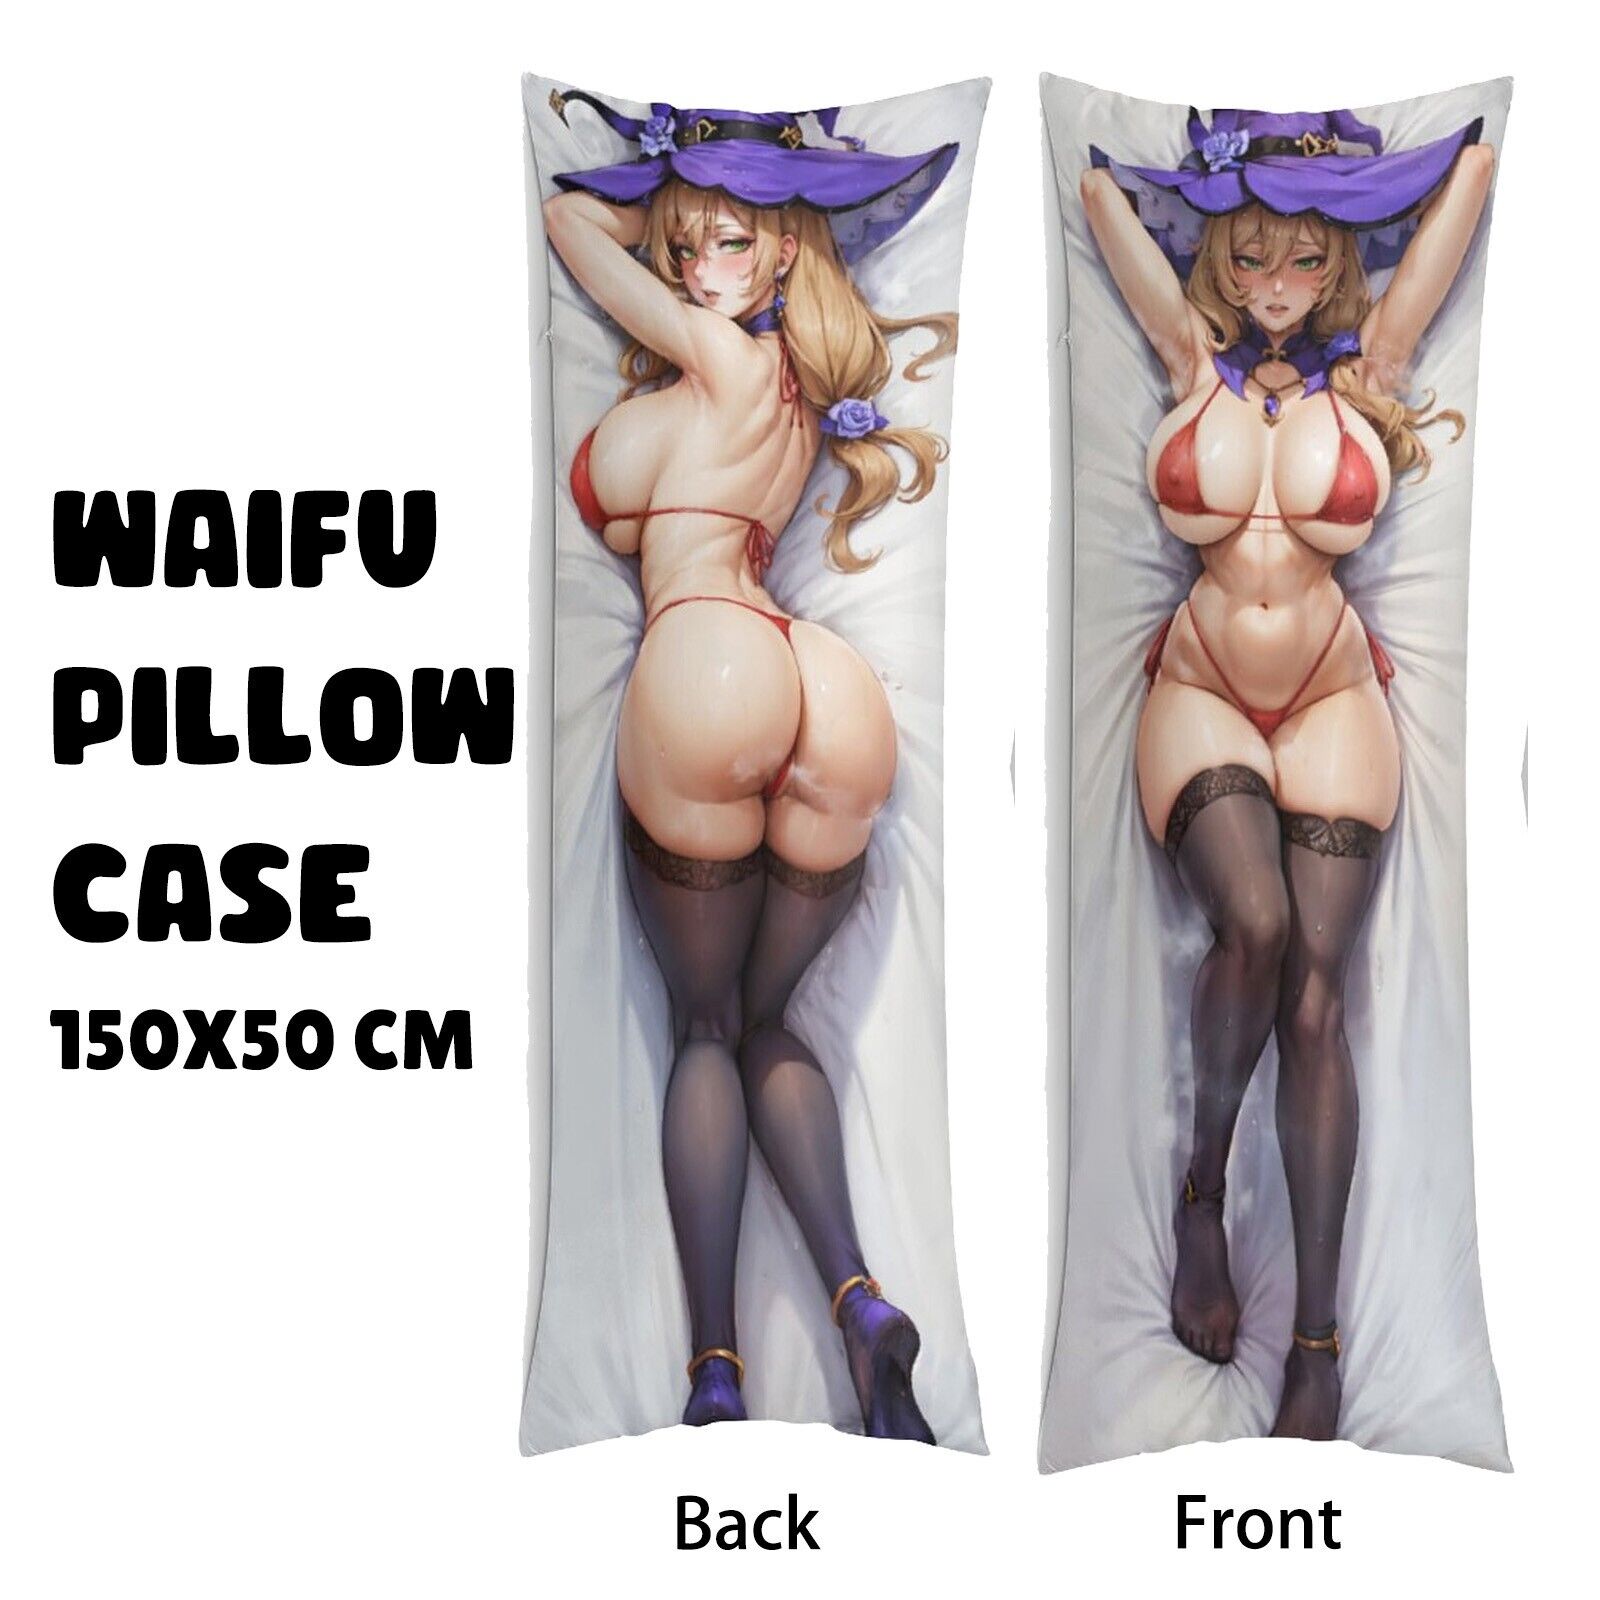 Awesome Anime sexy girl body pillowcase double-sided printed plush soft 150x 50 cm on eBay